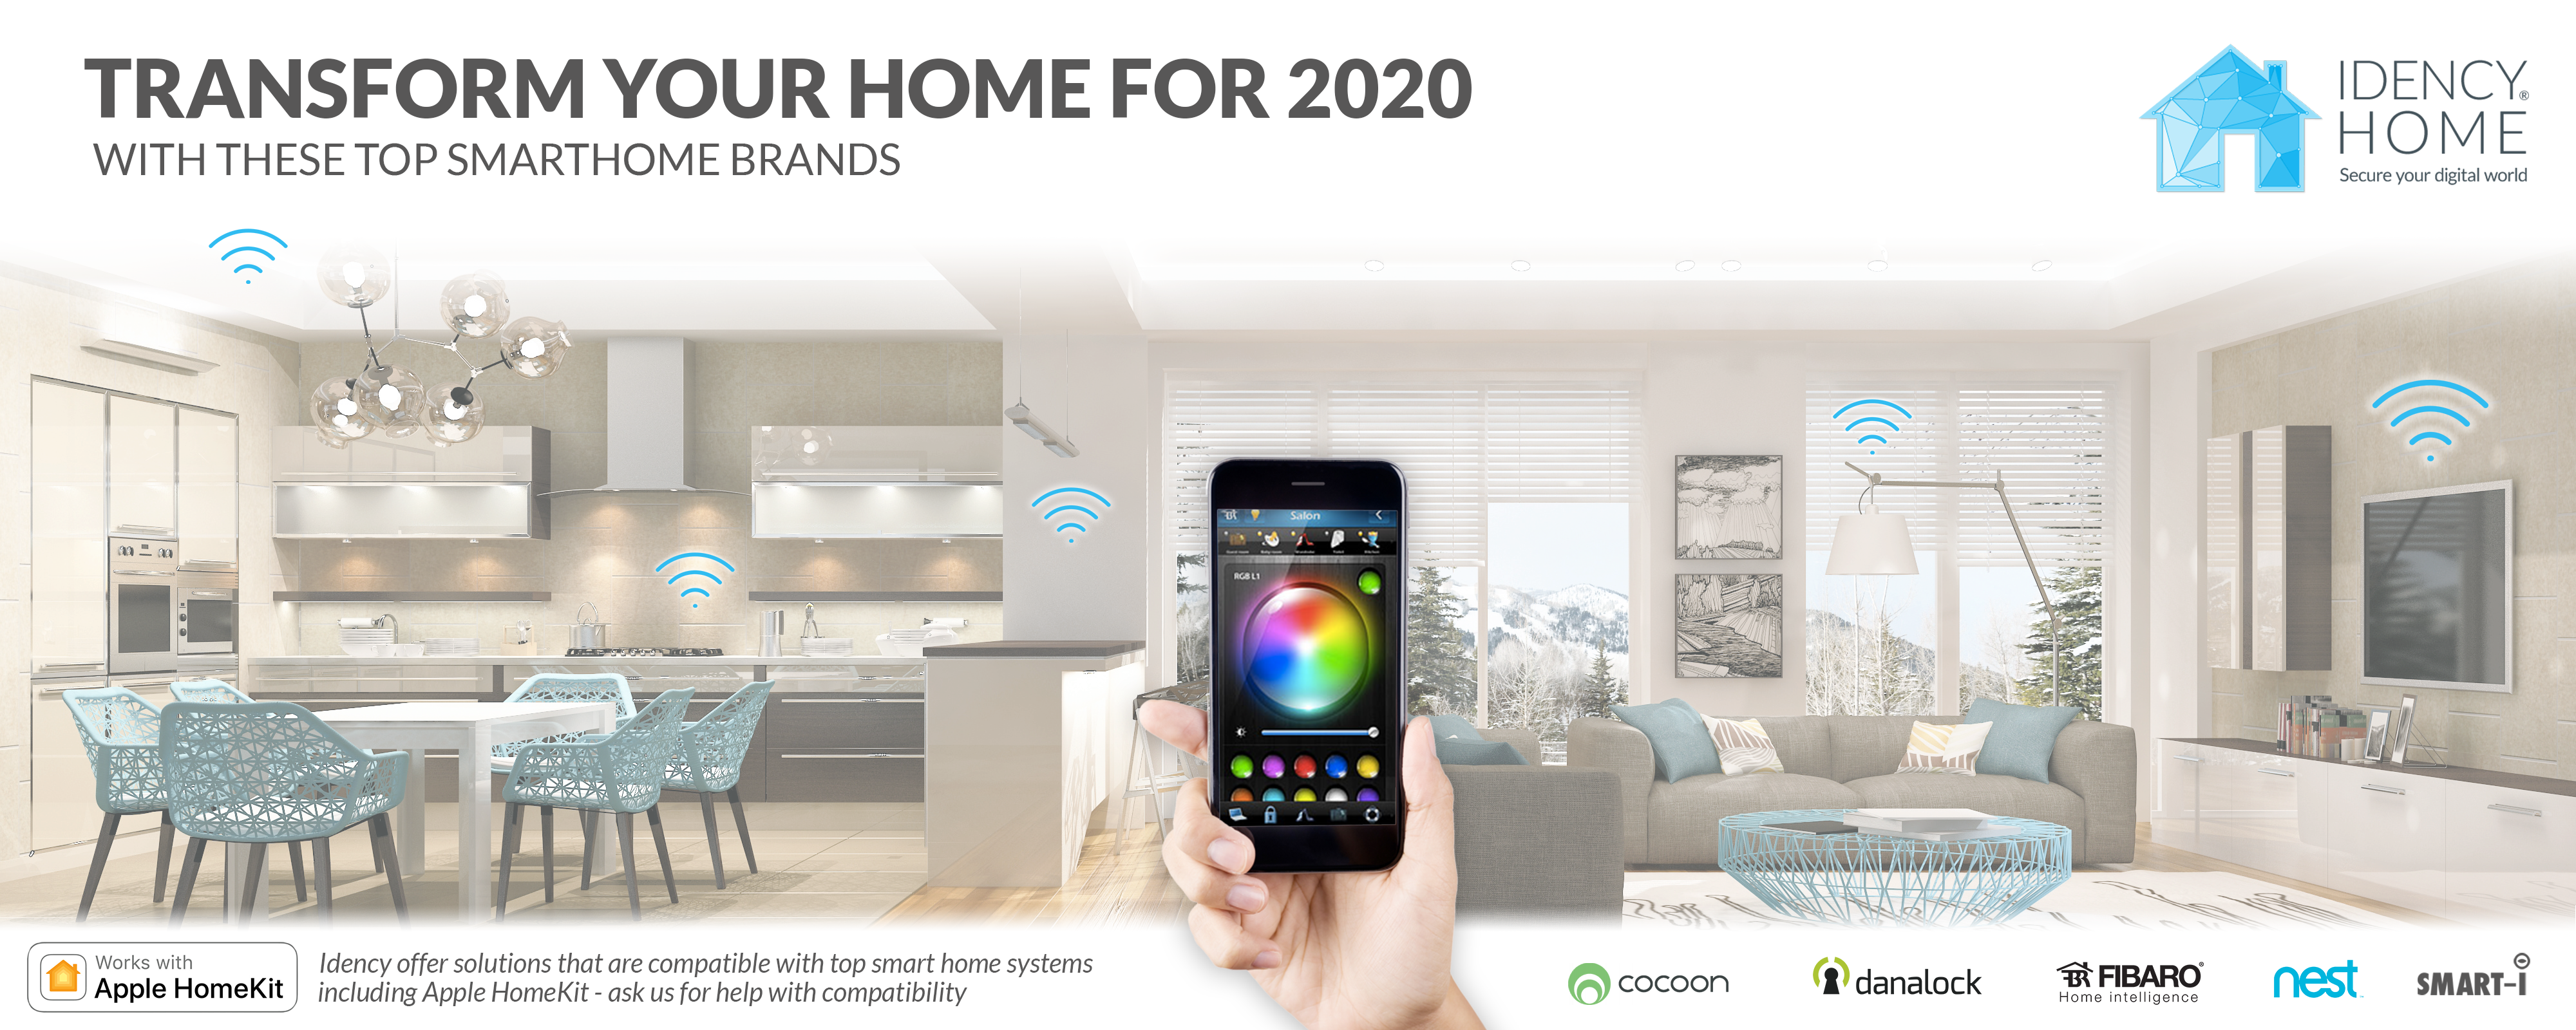 idencyhome-smarthome-brands-banner